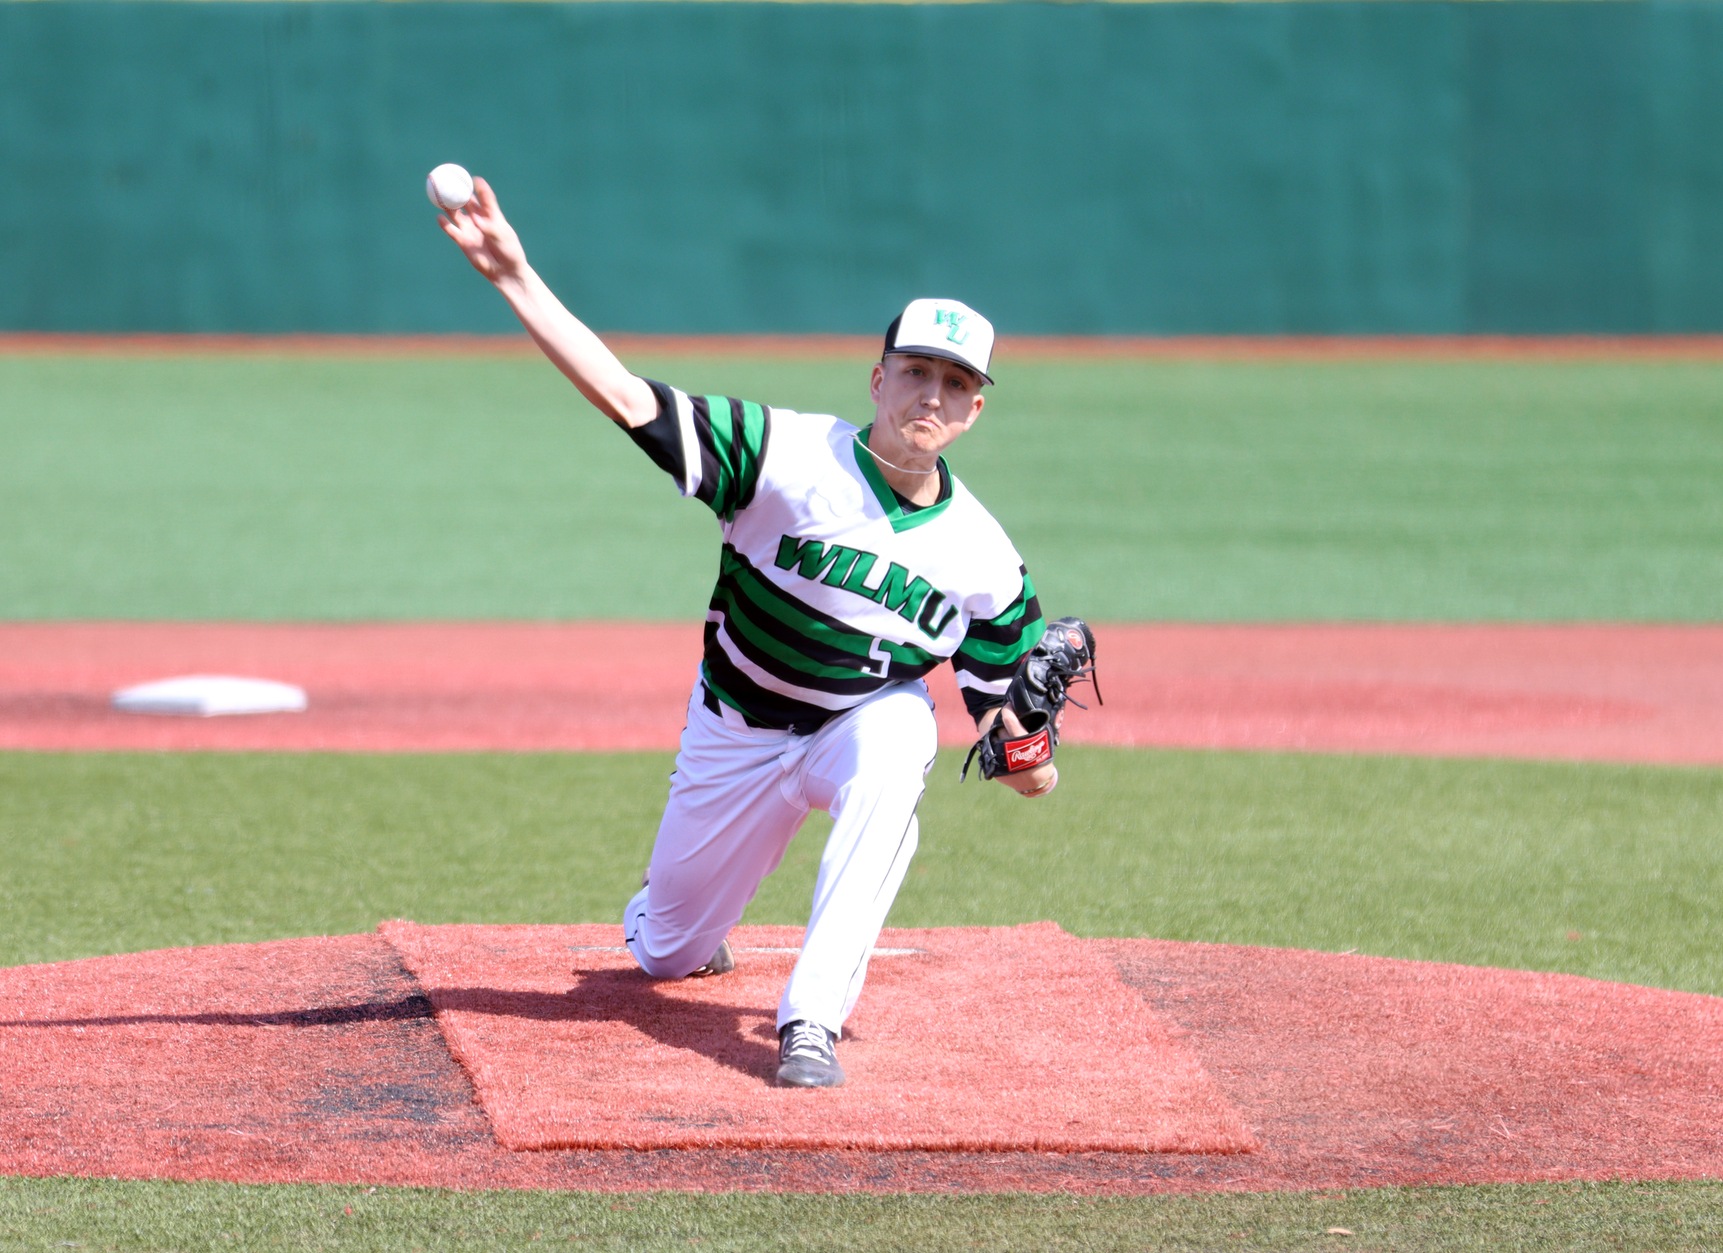 File photo of Matt Warrington who struck out 12 in six innings on Tuesday. Copyright 2020; Wilmington University. All rights reserved. Photo by Dan Lauletta. February 23, 2020 vs. #12 New York Tech in Myrtle Beach.